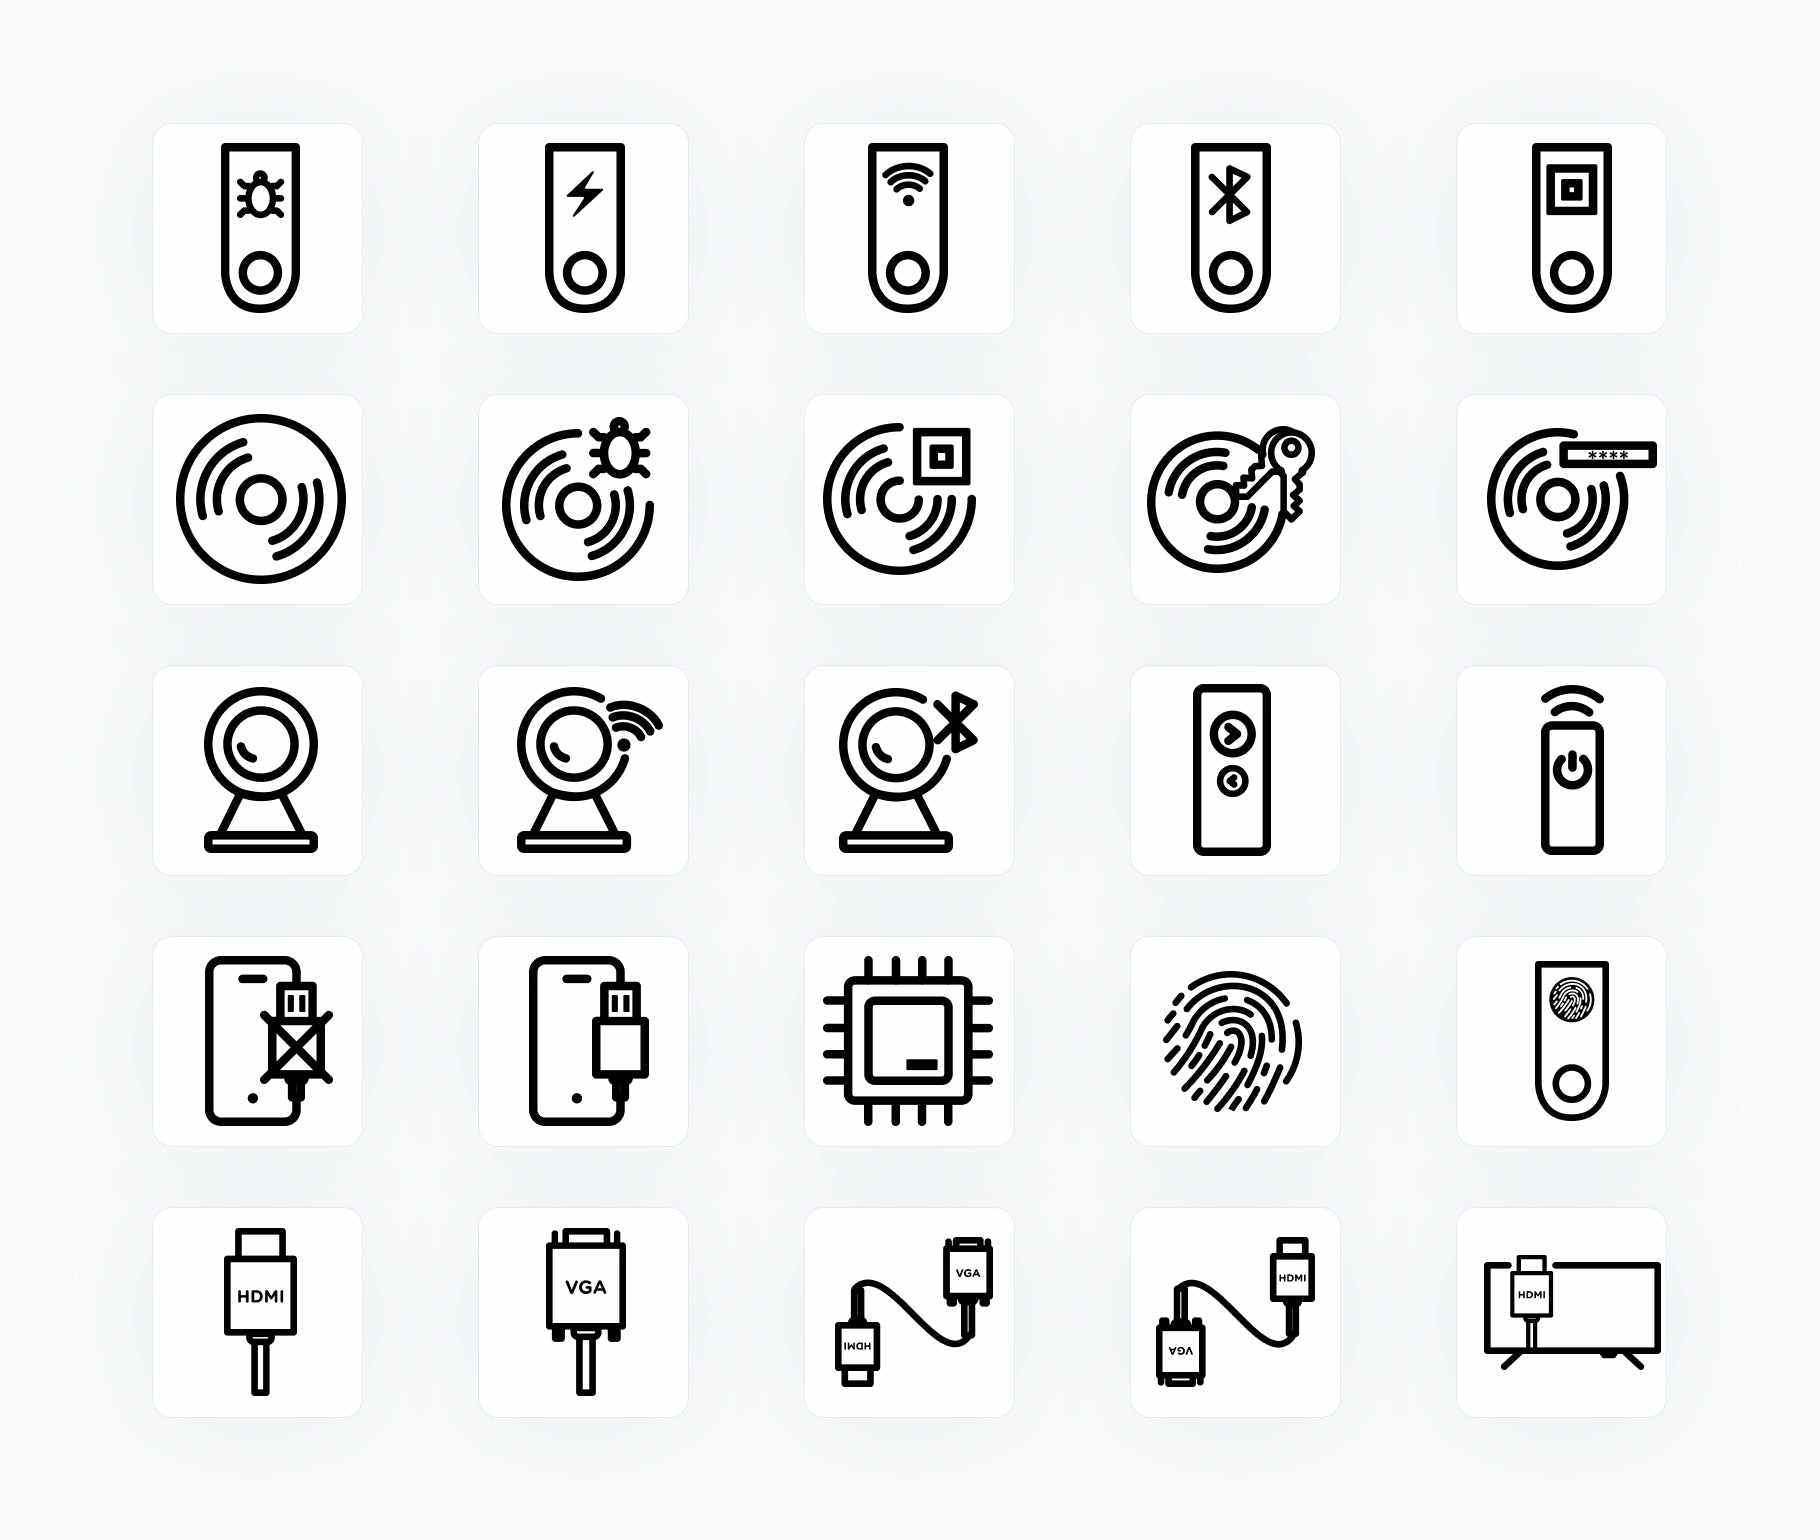 Technology-Outline-Vector-Icons Icons Technology Outline Vector Icons S12162103 powerpoint-template keynote-template google-slides-template infographic-template